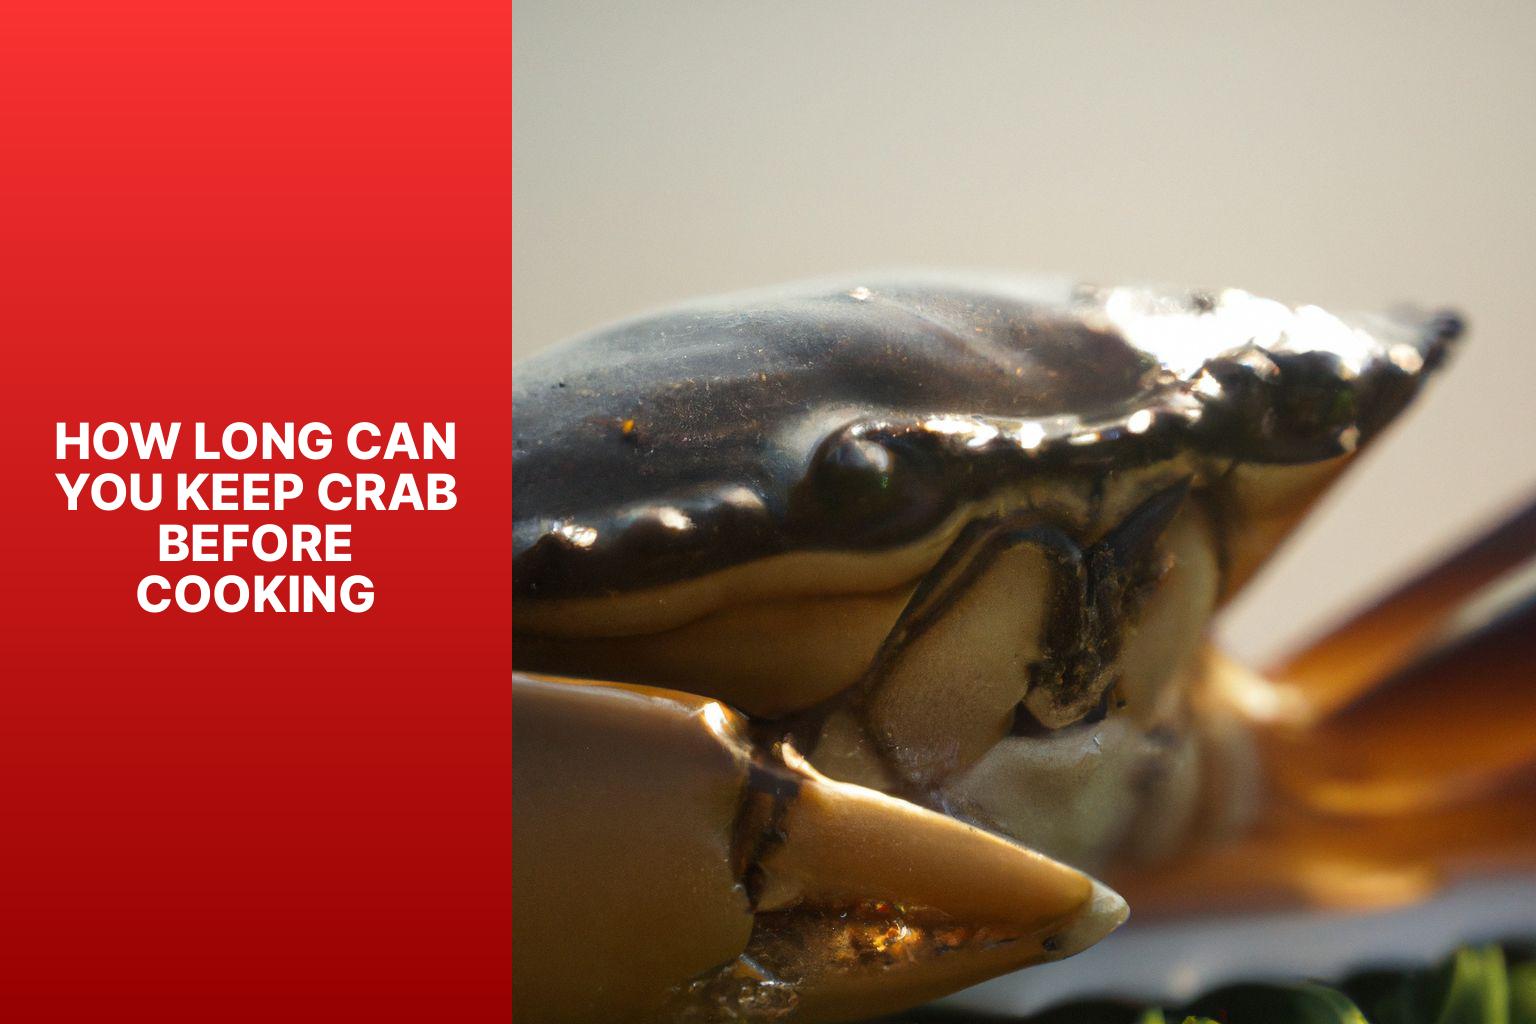 How Long Can You Keep Crab Before Cooking